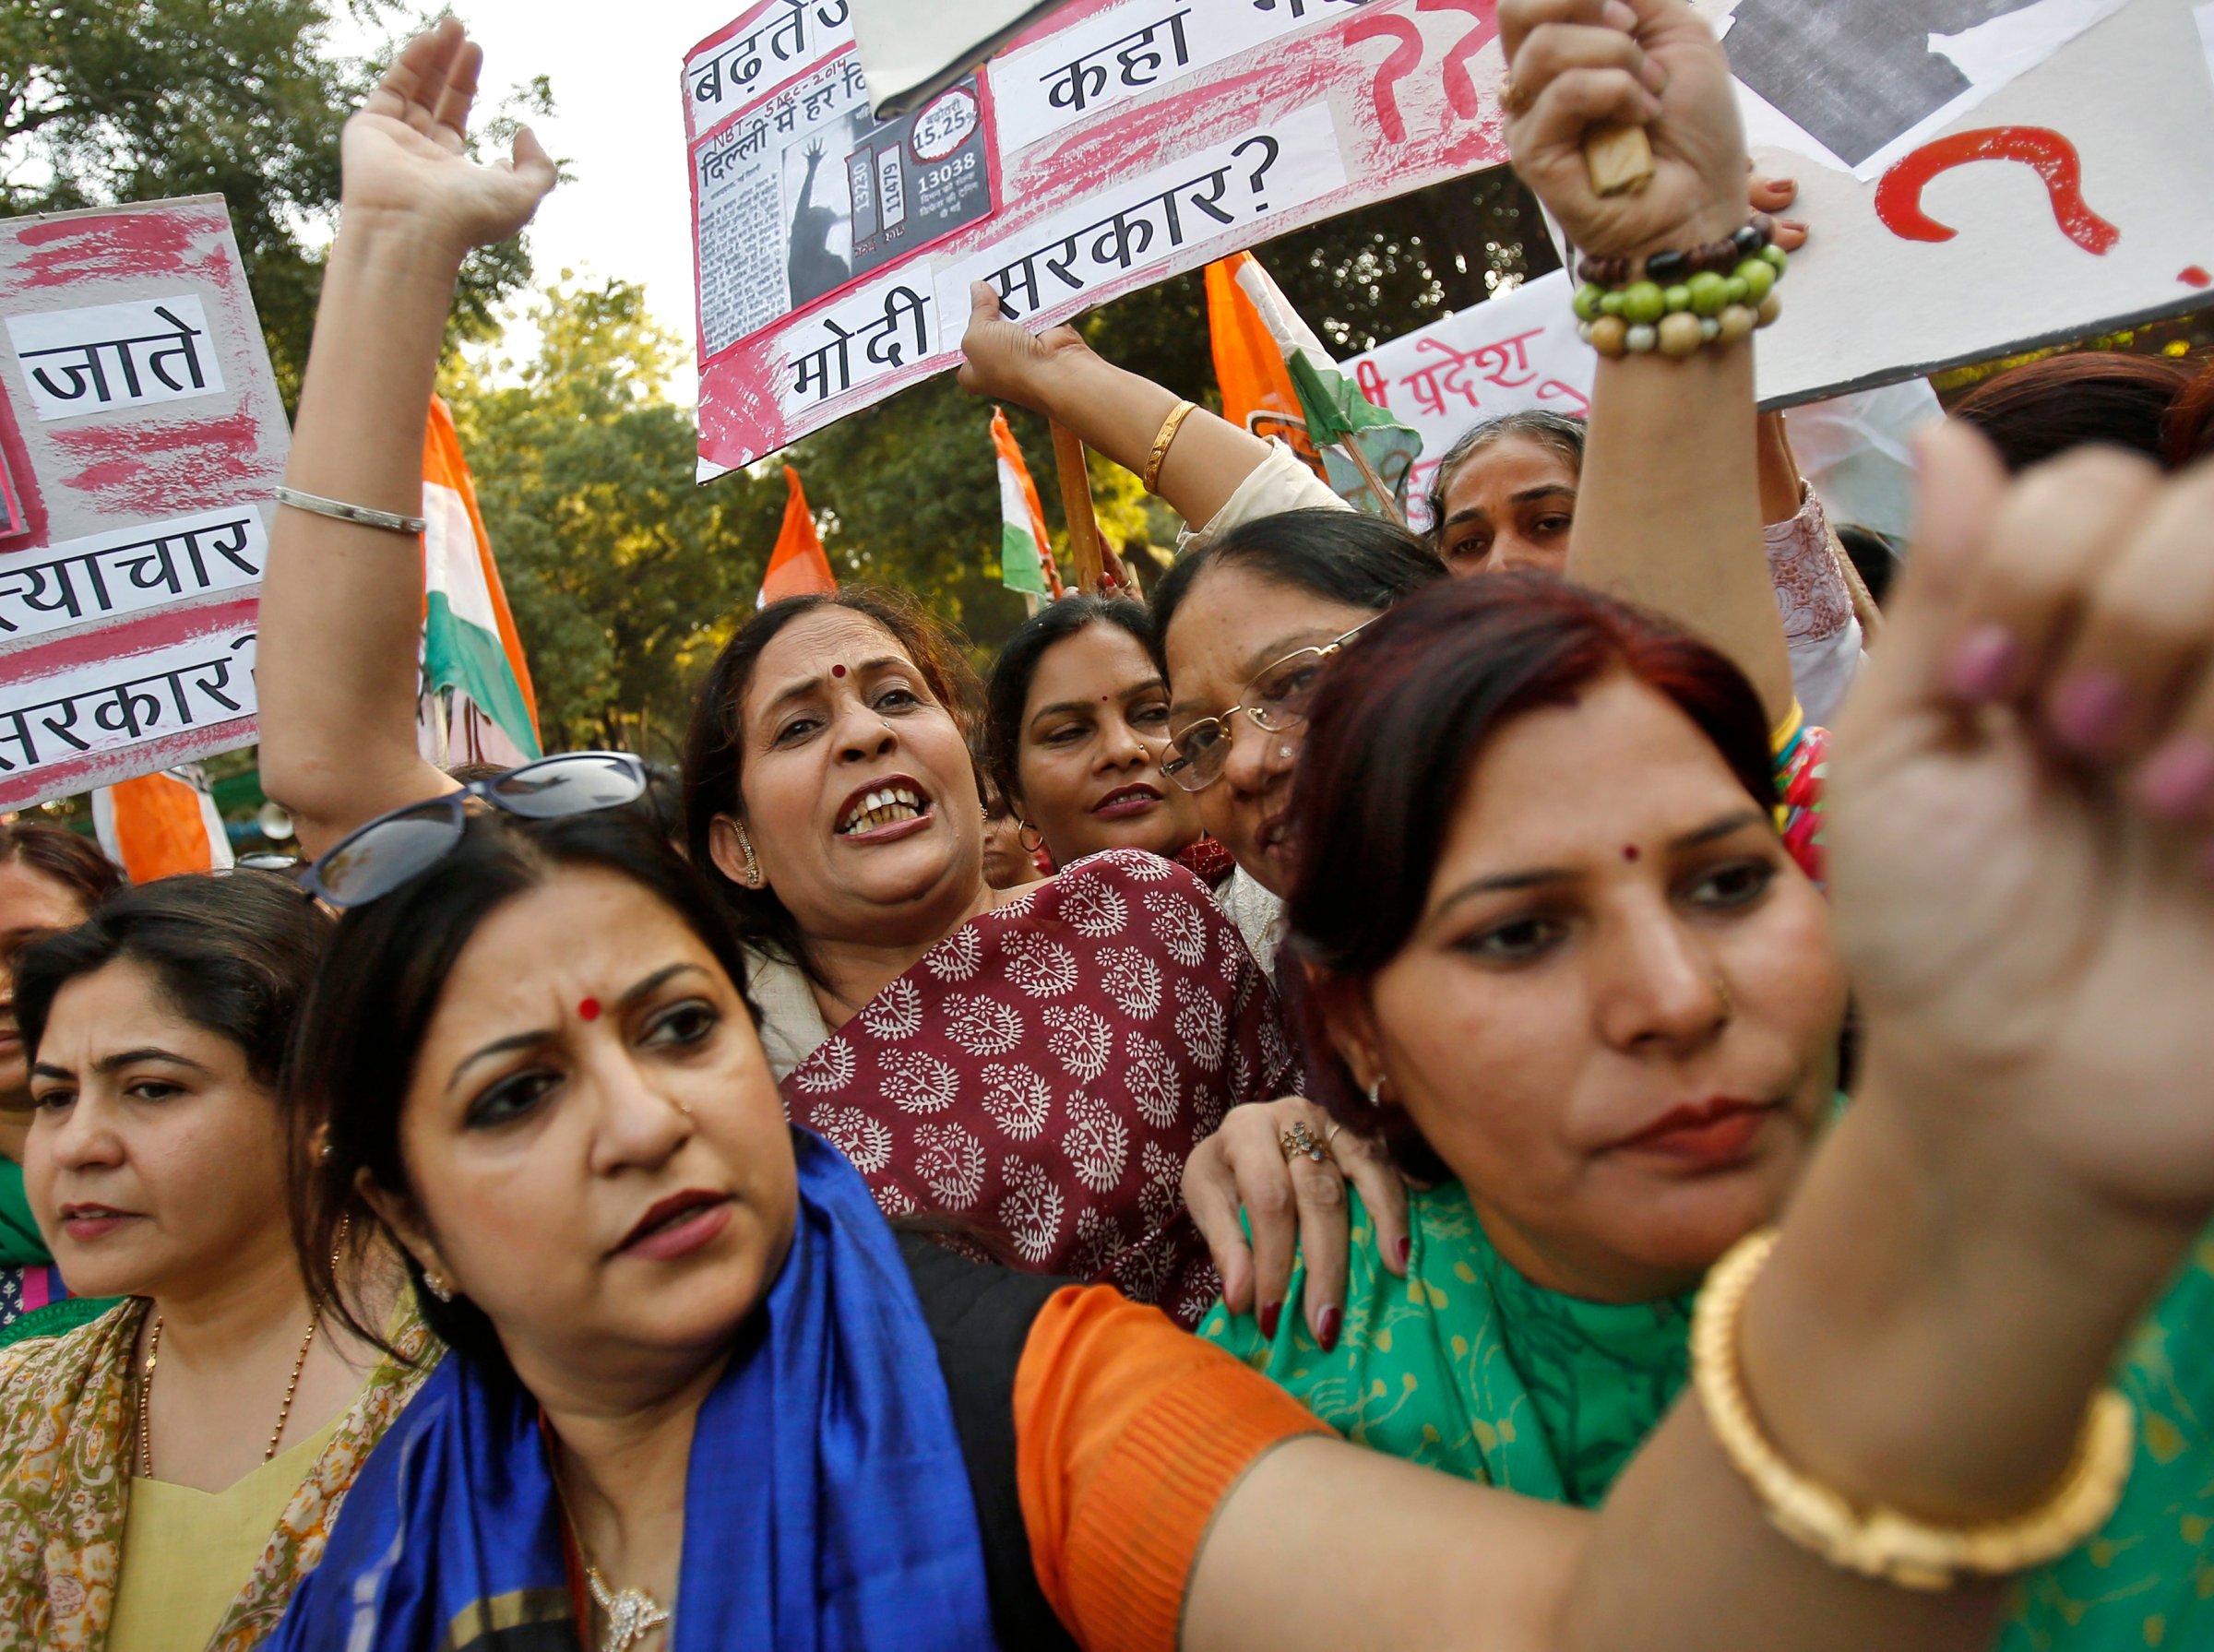 Members of All India Mahila Congress, women's wing of Congress party, shout slogans and carry placards during a protest against the rape of a female passenger, in New Delhi